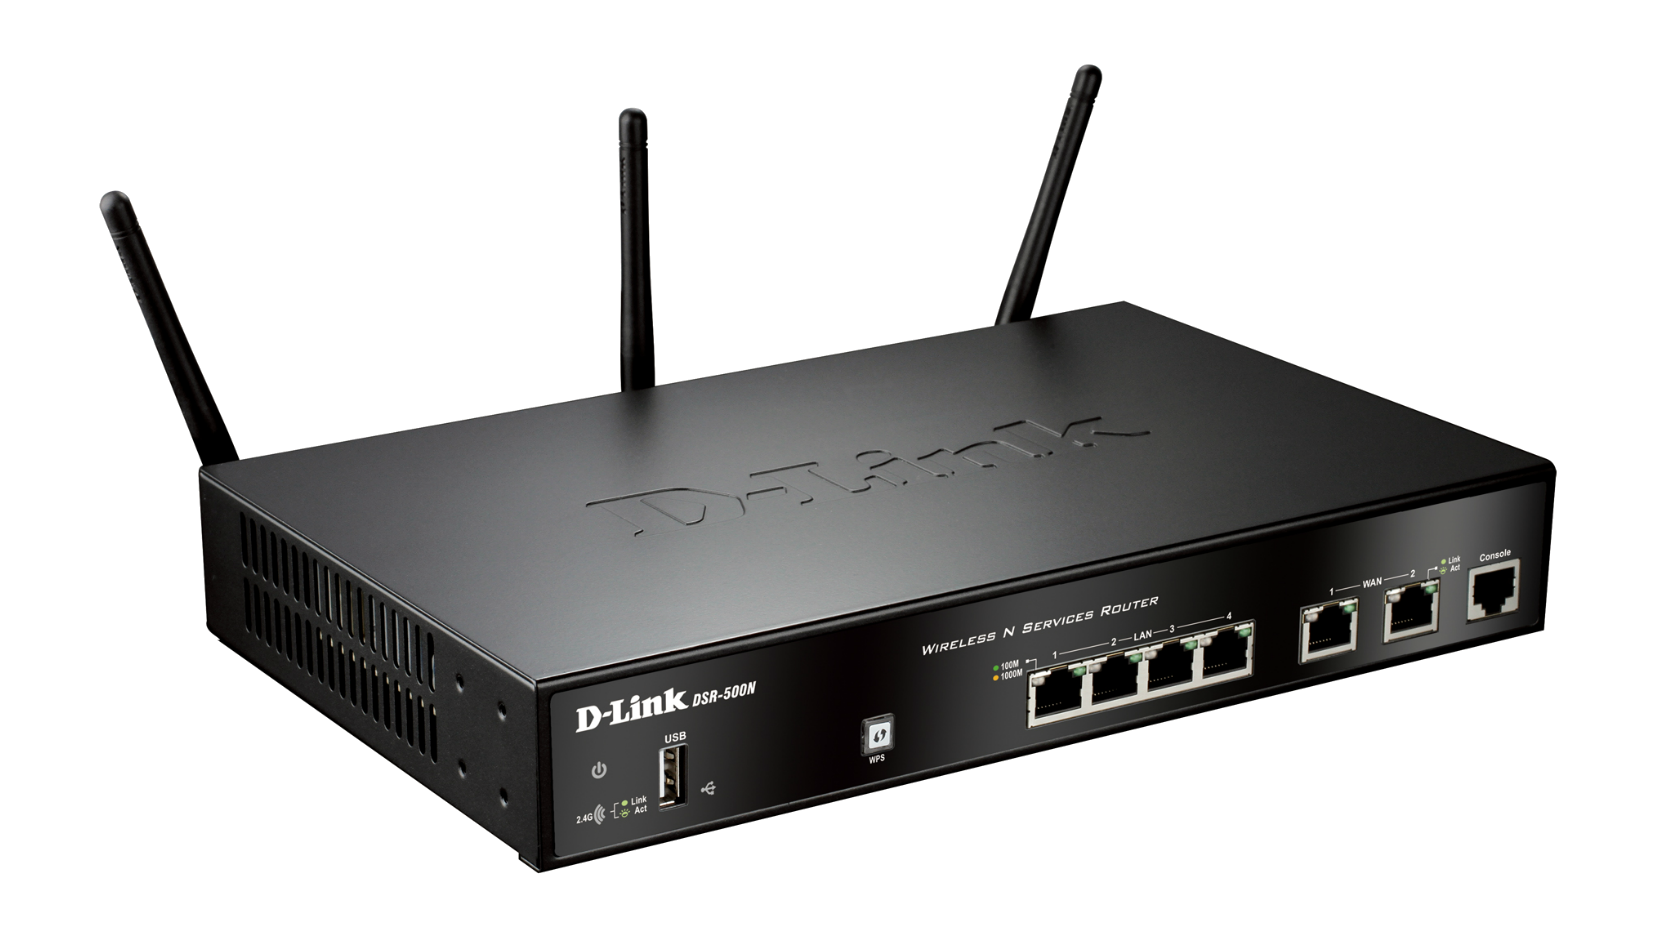 DSR-500N Wireless N Unified Services Router | D-Link UK